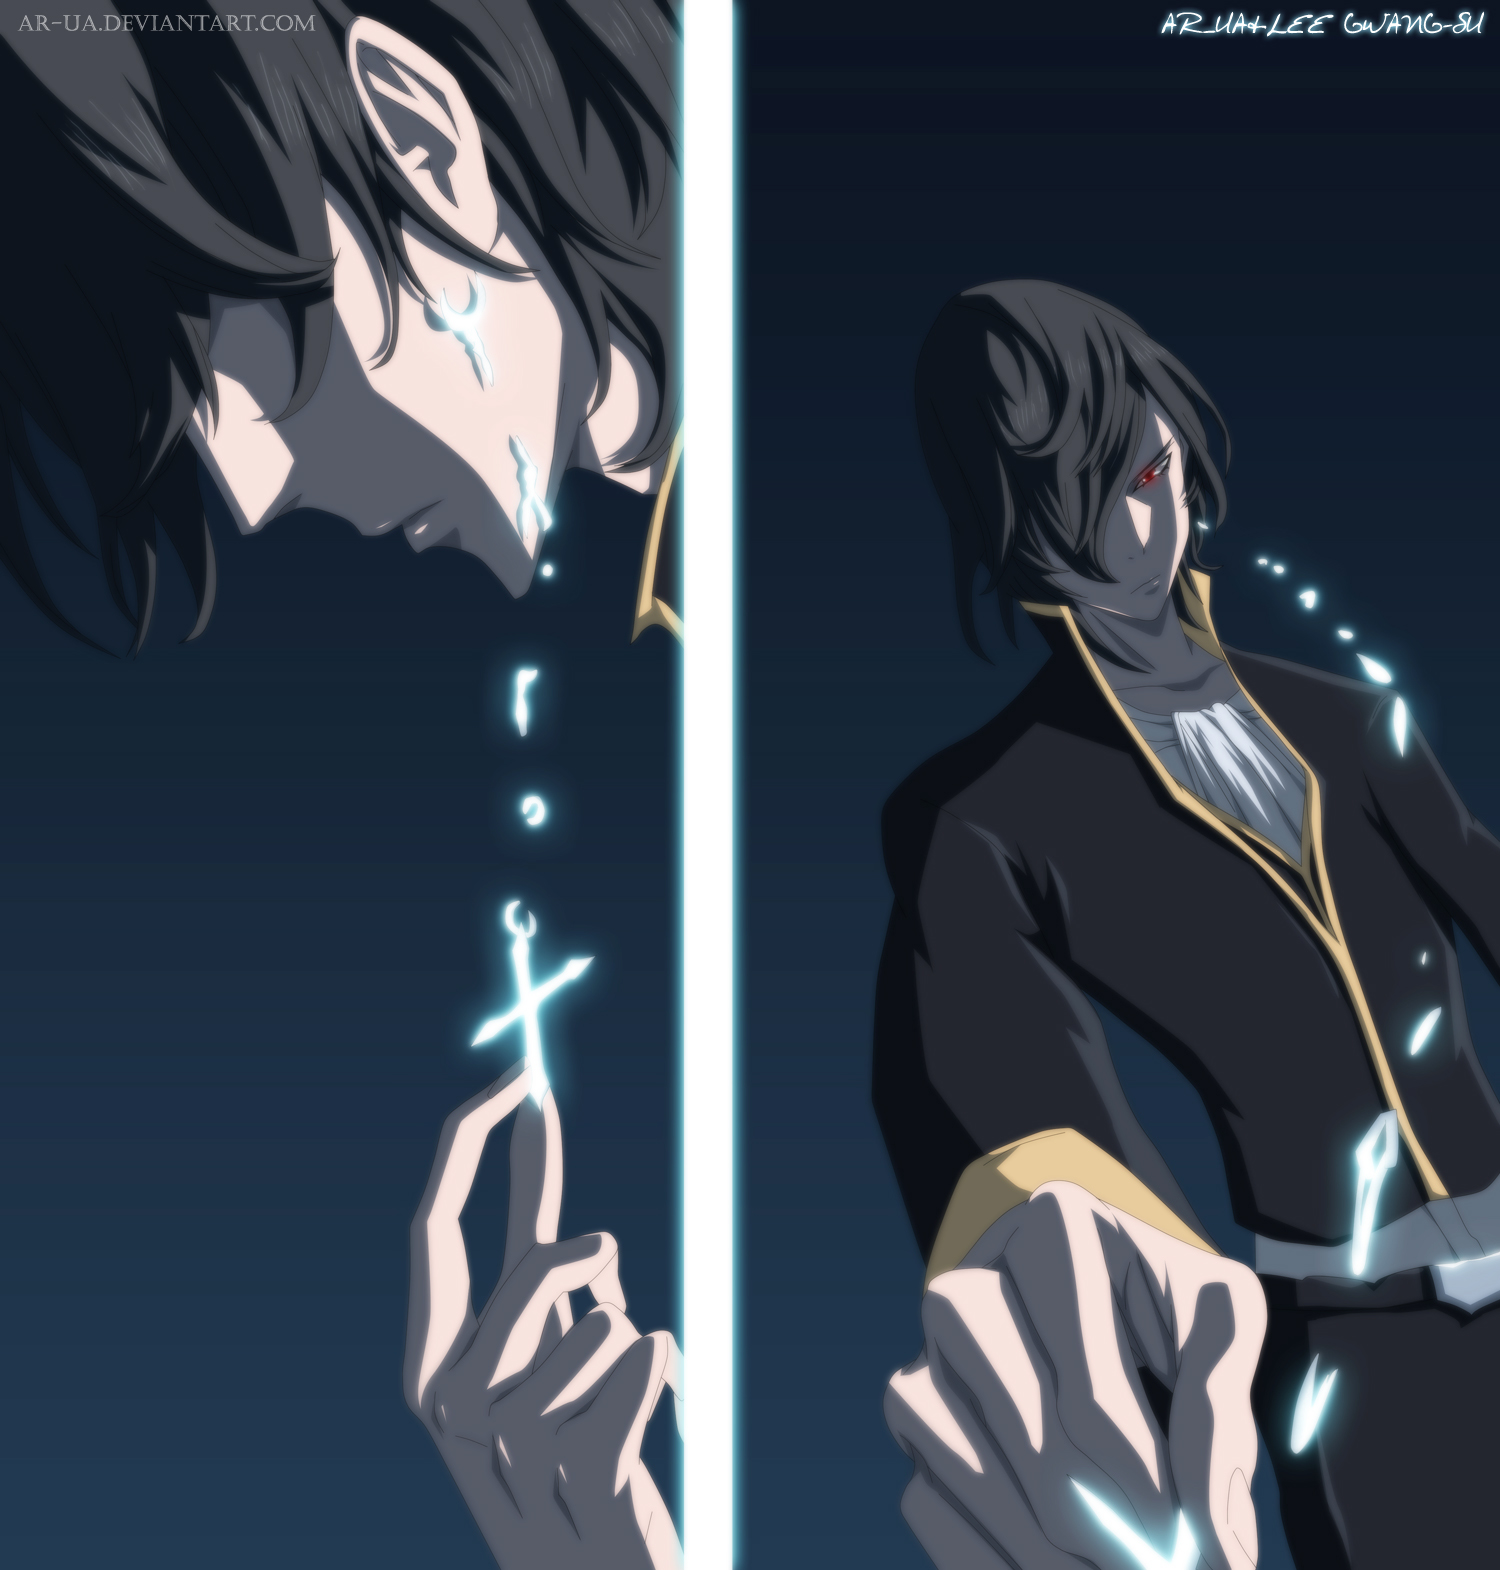 Noblesse #7